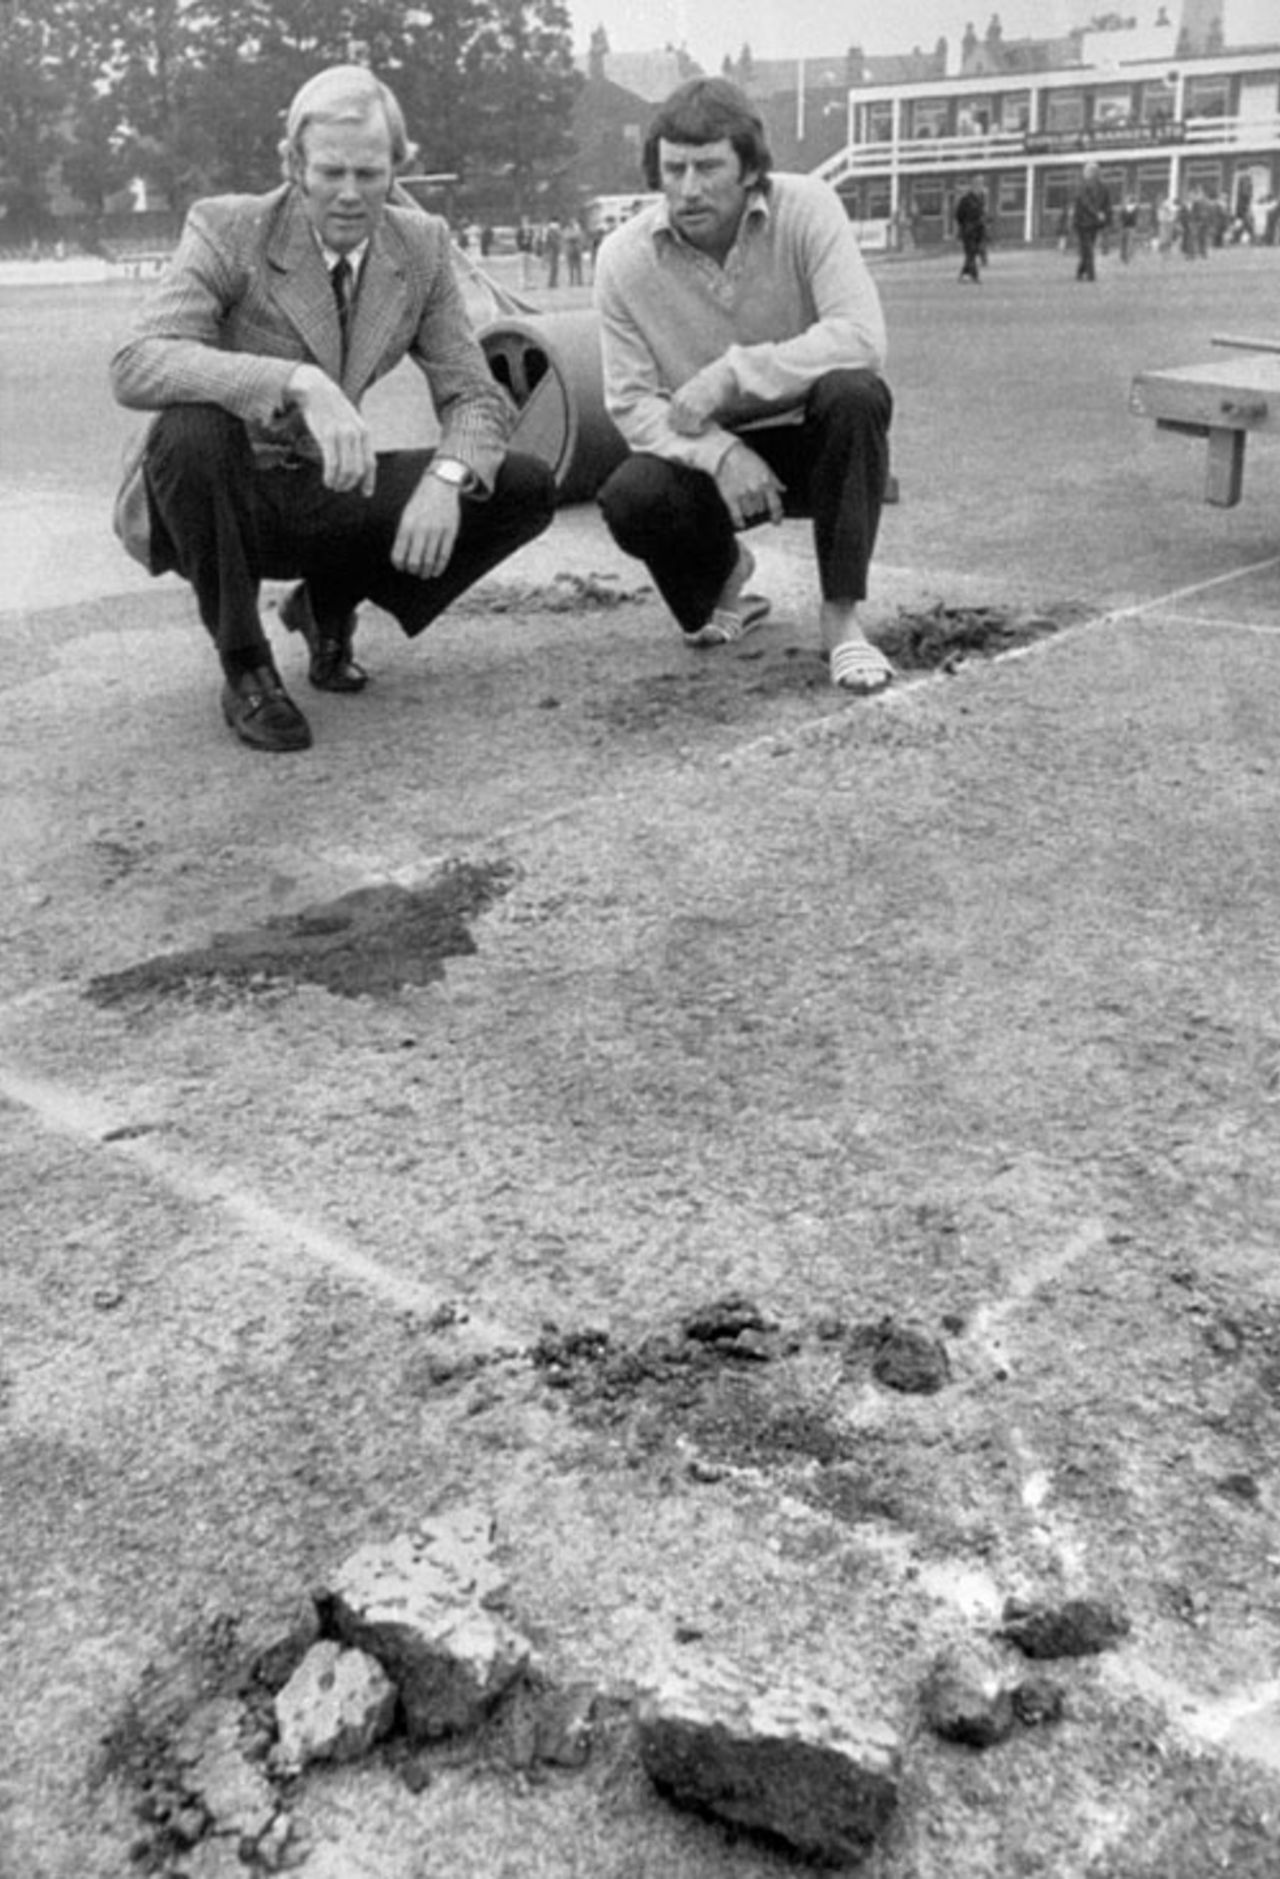 Tony Greig and Ian Chappell inspect the vandalised pitch, England v Australia, 3rd Test, Leeds, August 19, 1975